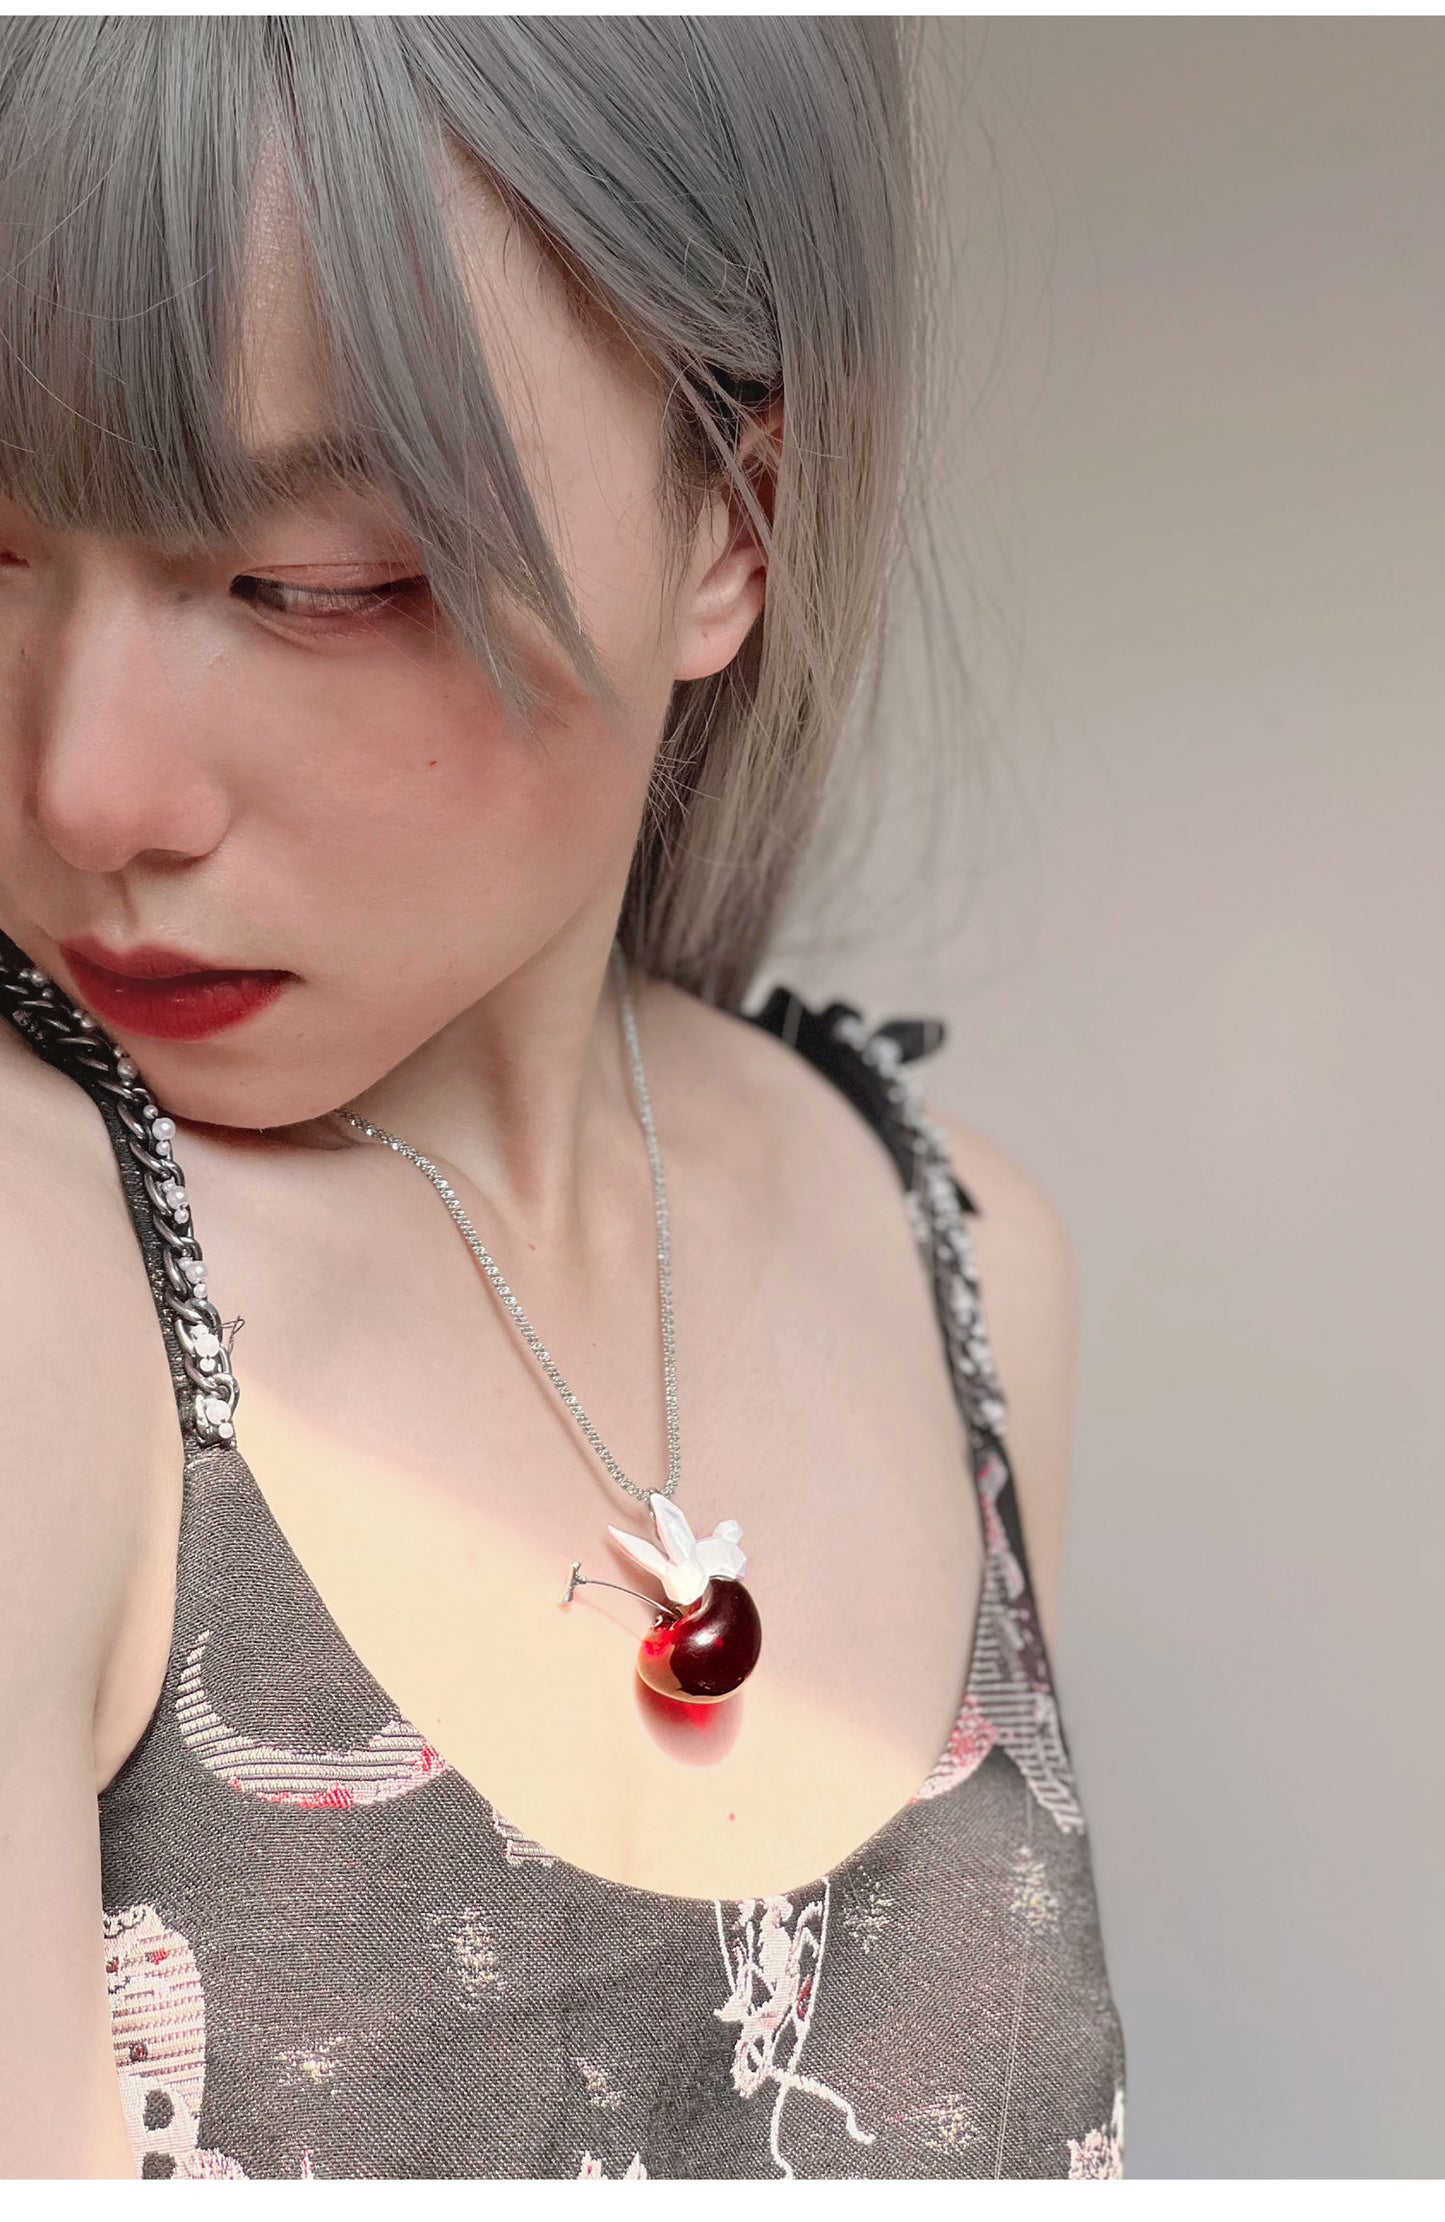 Cerise | Charming Cherry Critter Necklace